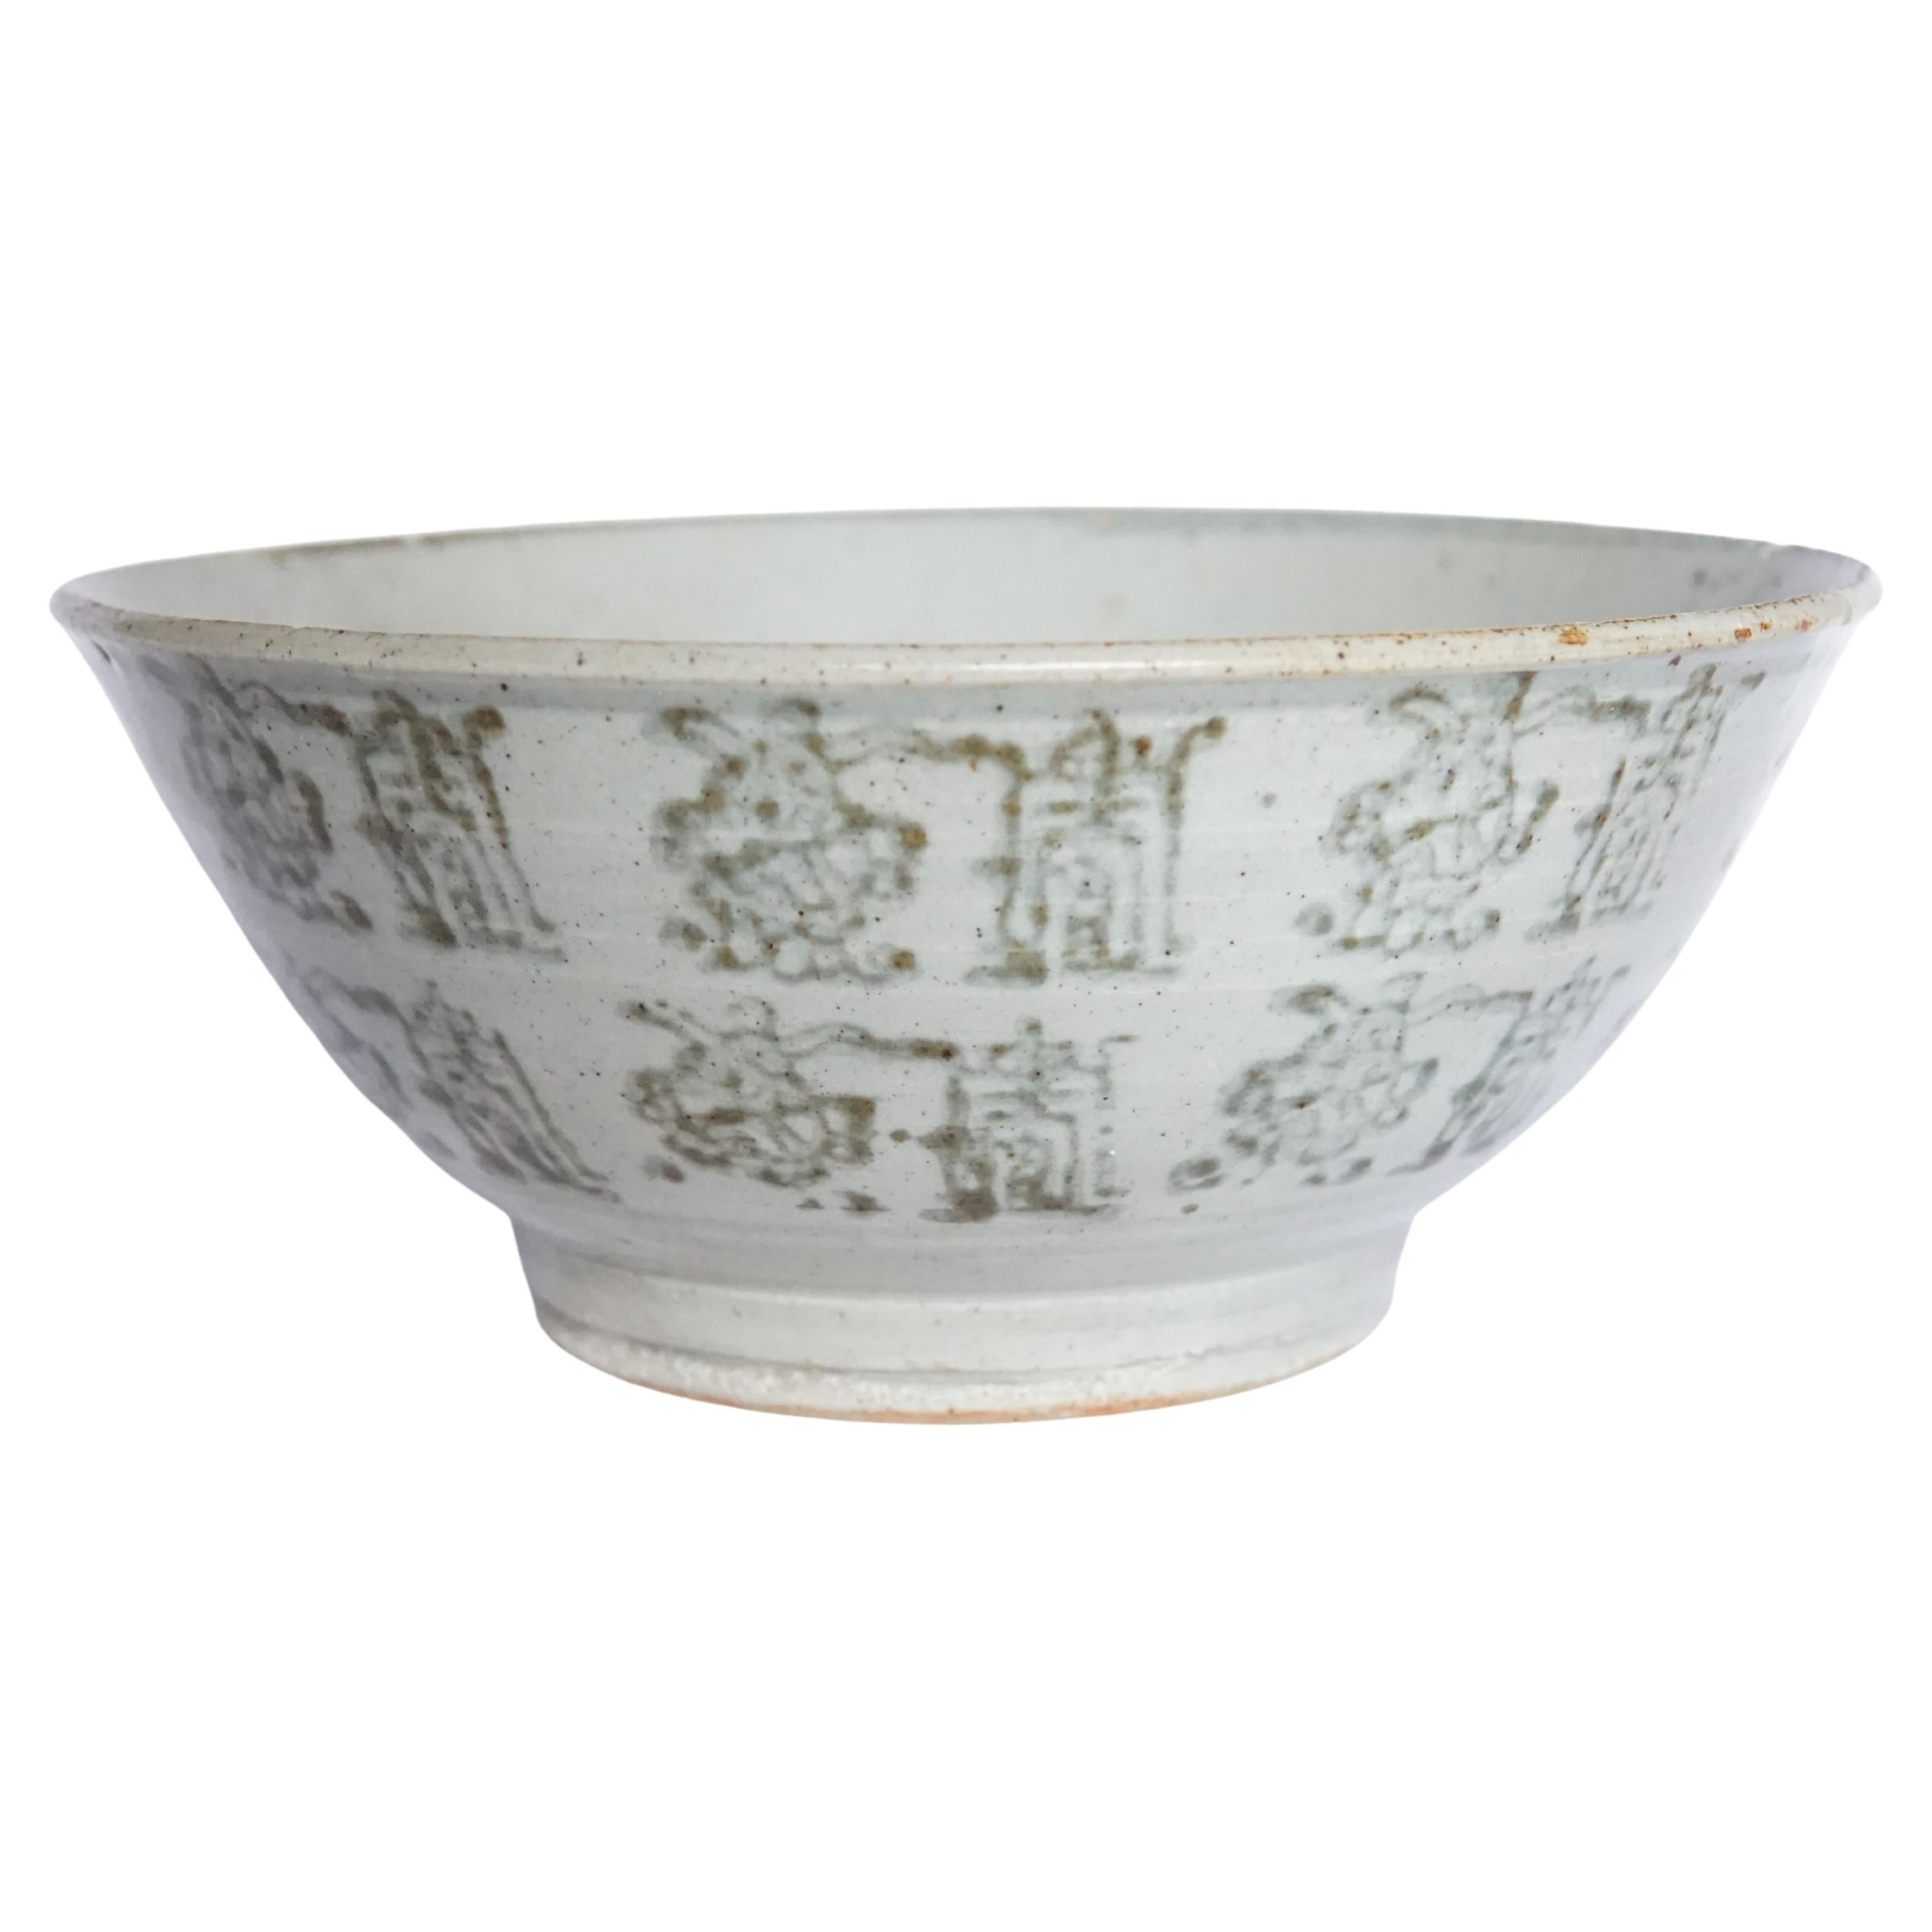 Chinese Blue & White Porcelain Bowl with Hand-Painted Symbols, Qing Dynasty